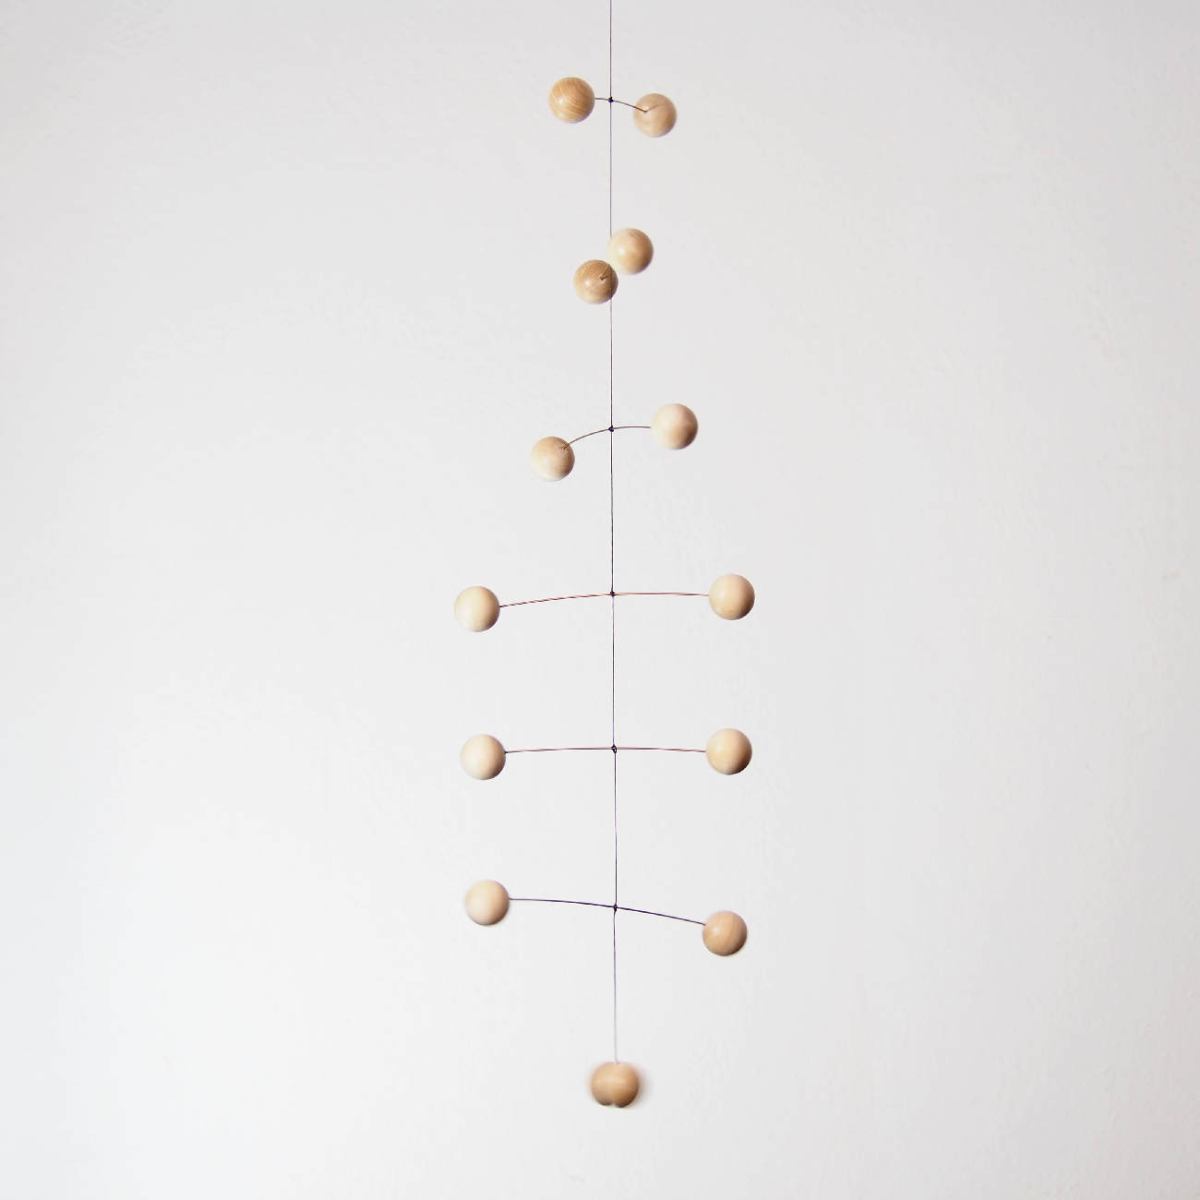 Handmade upright mobile "DNA" made of wood